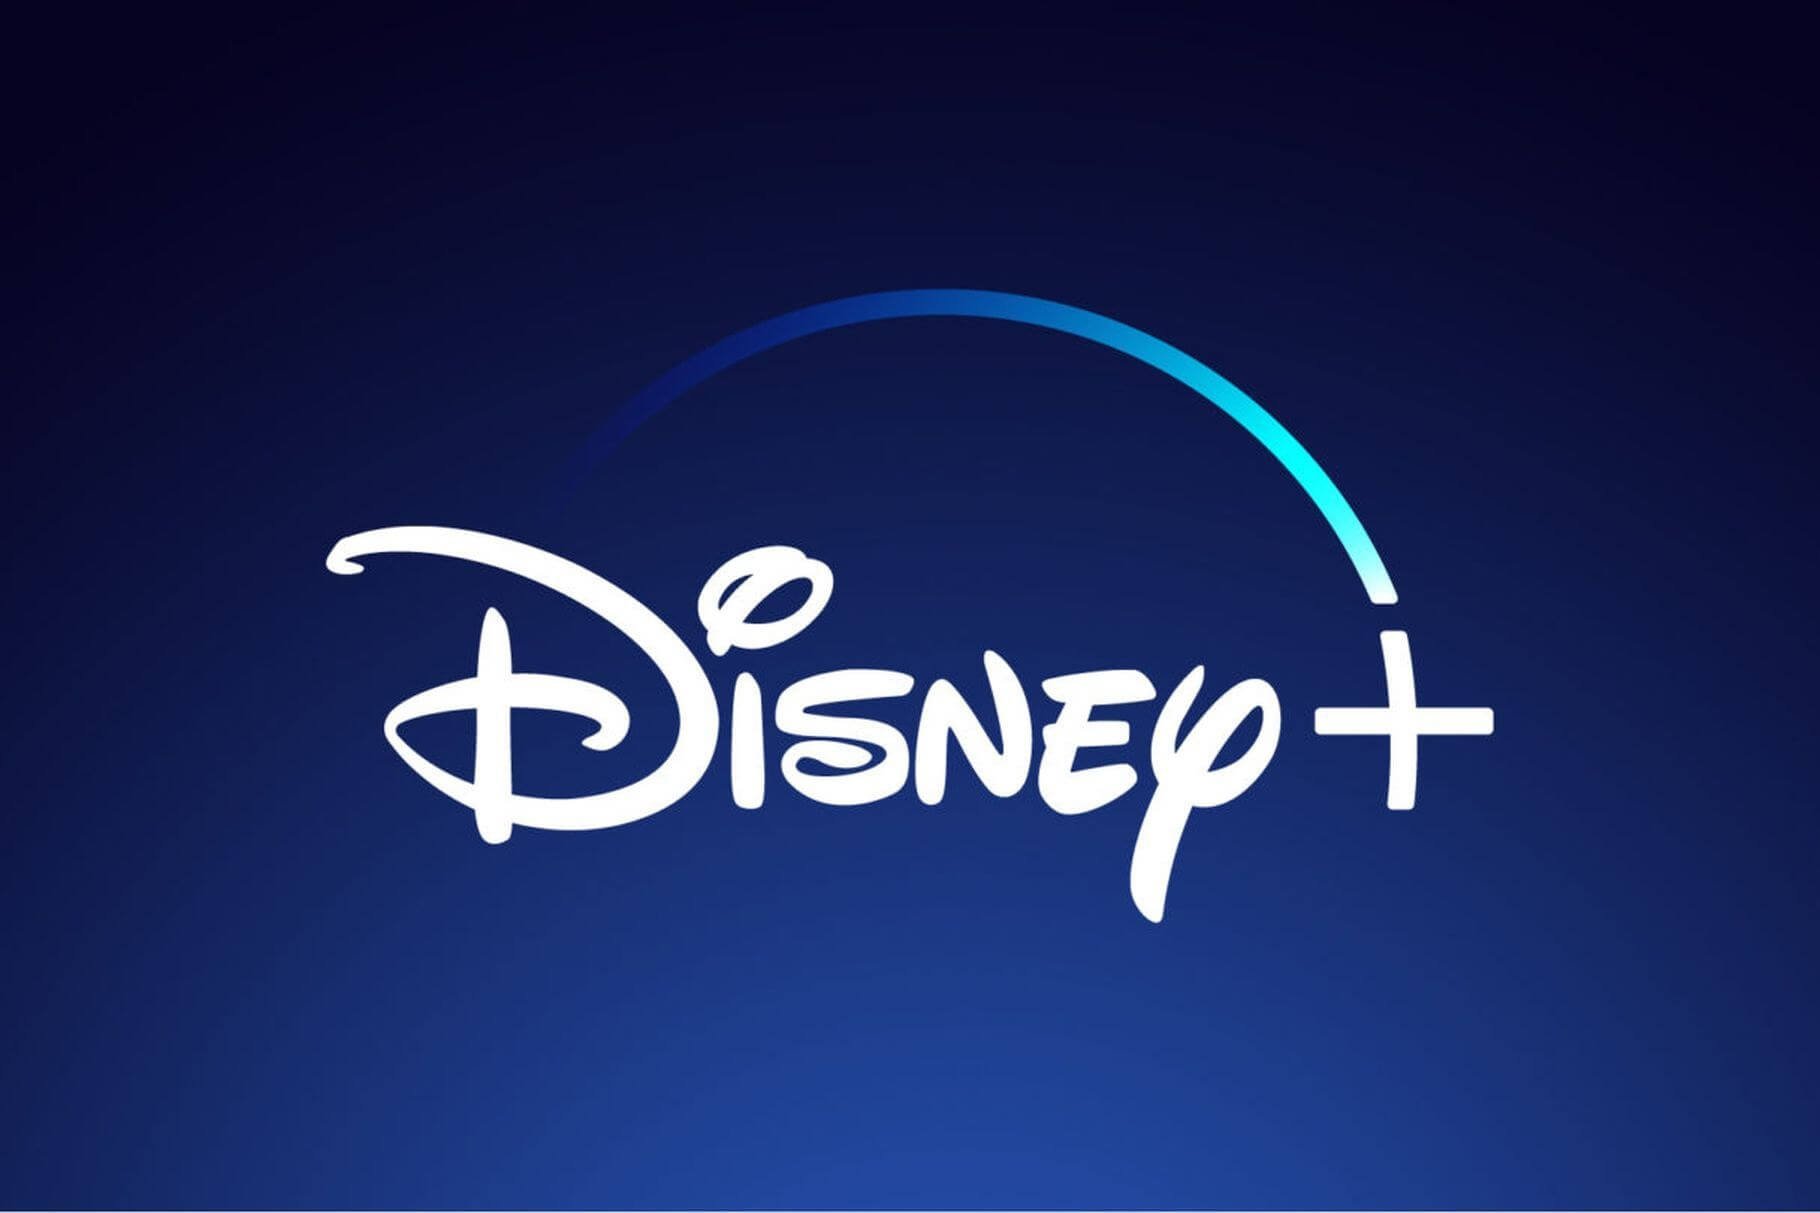 Disney+ streaming service launches late next year with new Star Wars, Marvel series